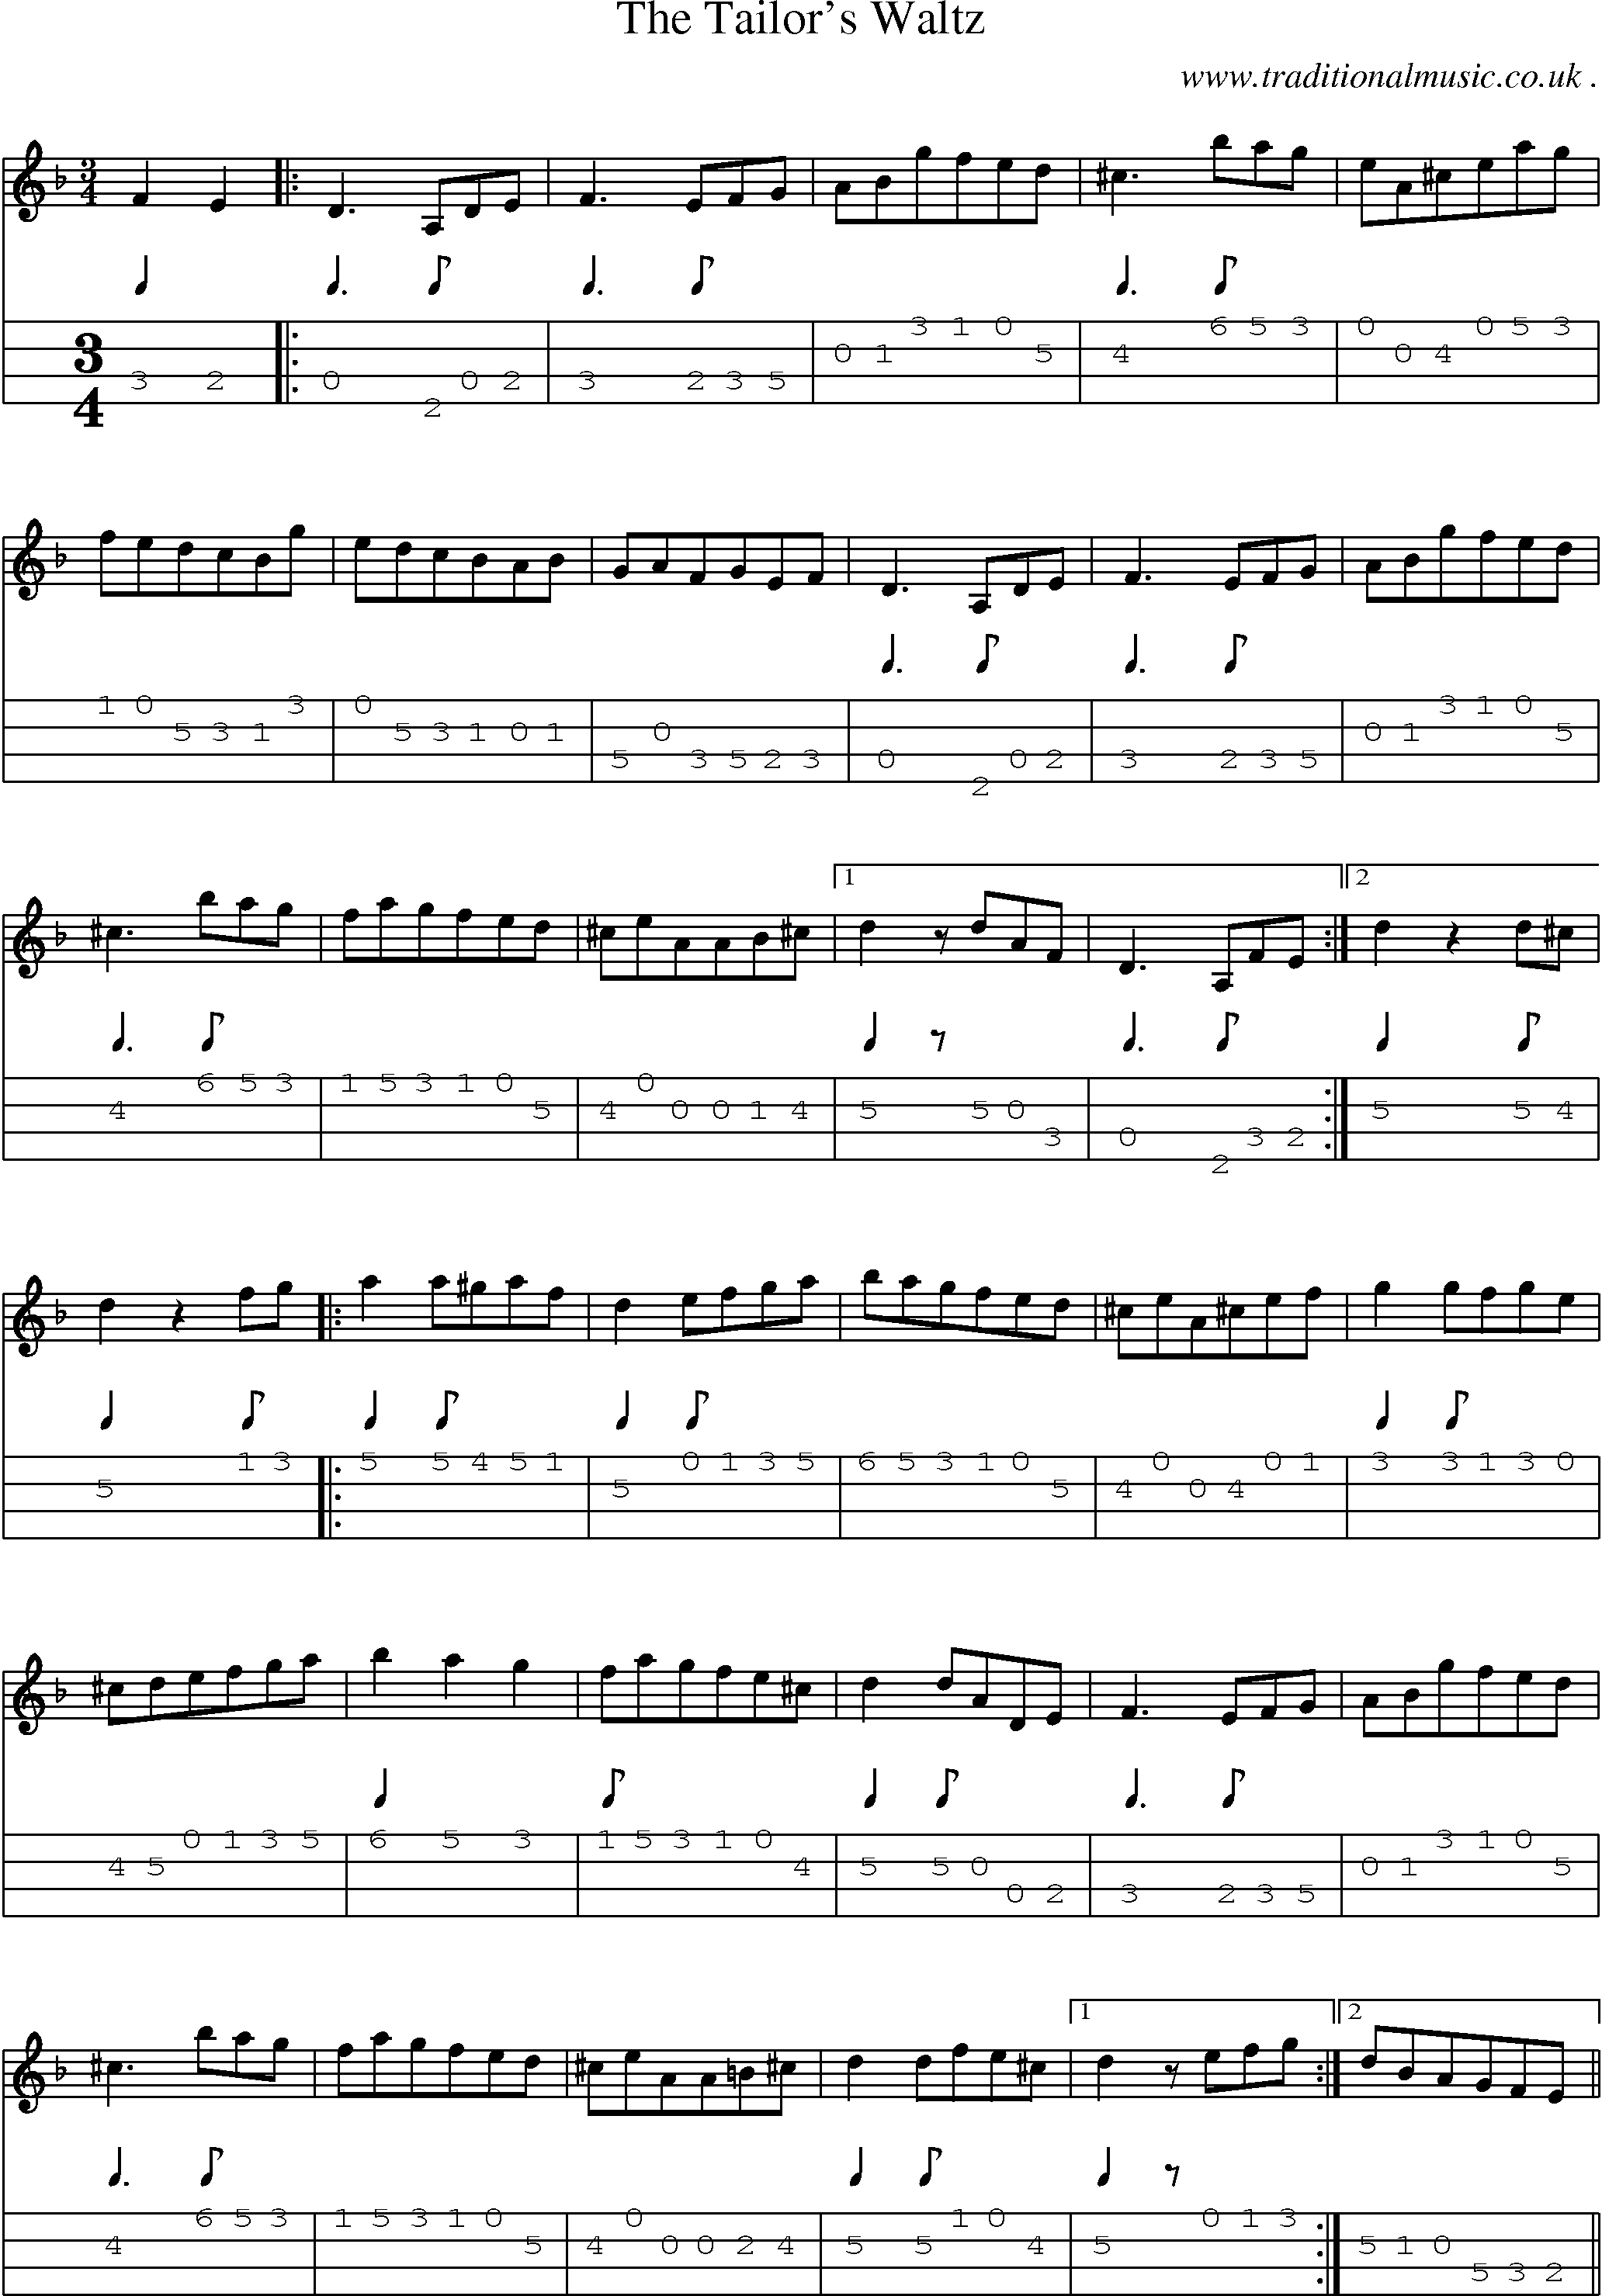 Sheet-Music and Mandolin Tabs for The Tailors Waltz